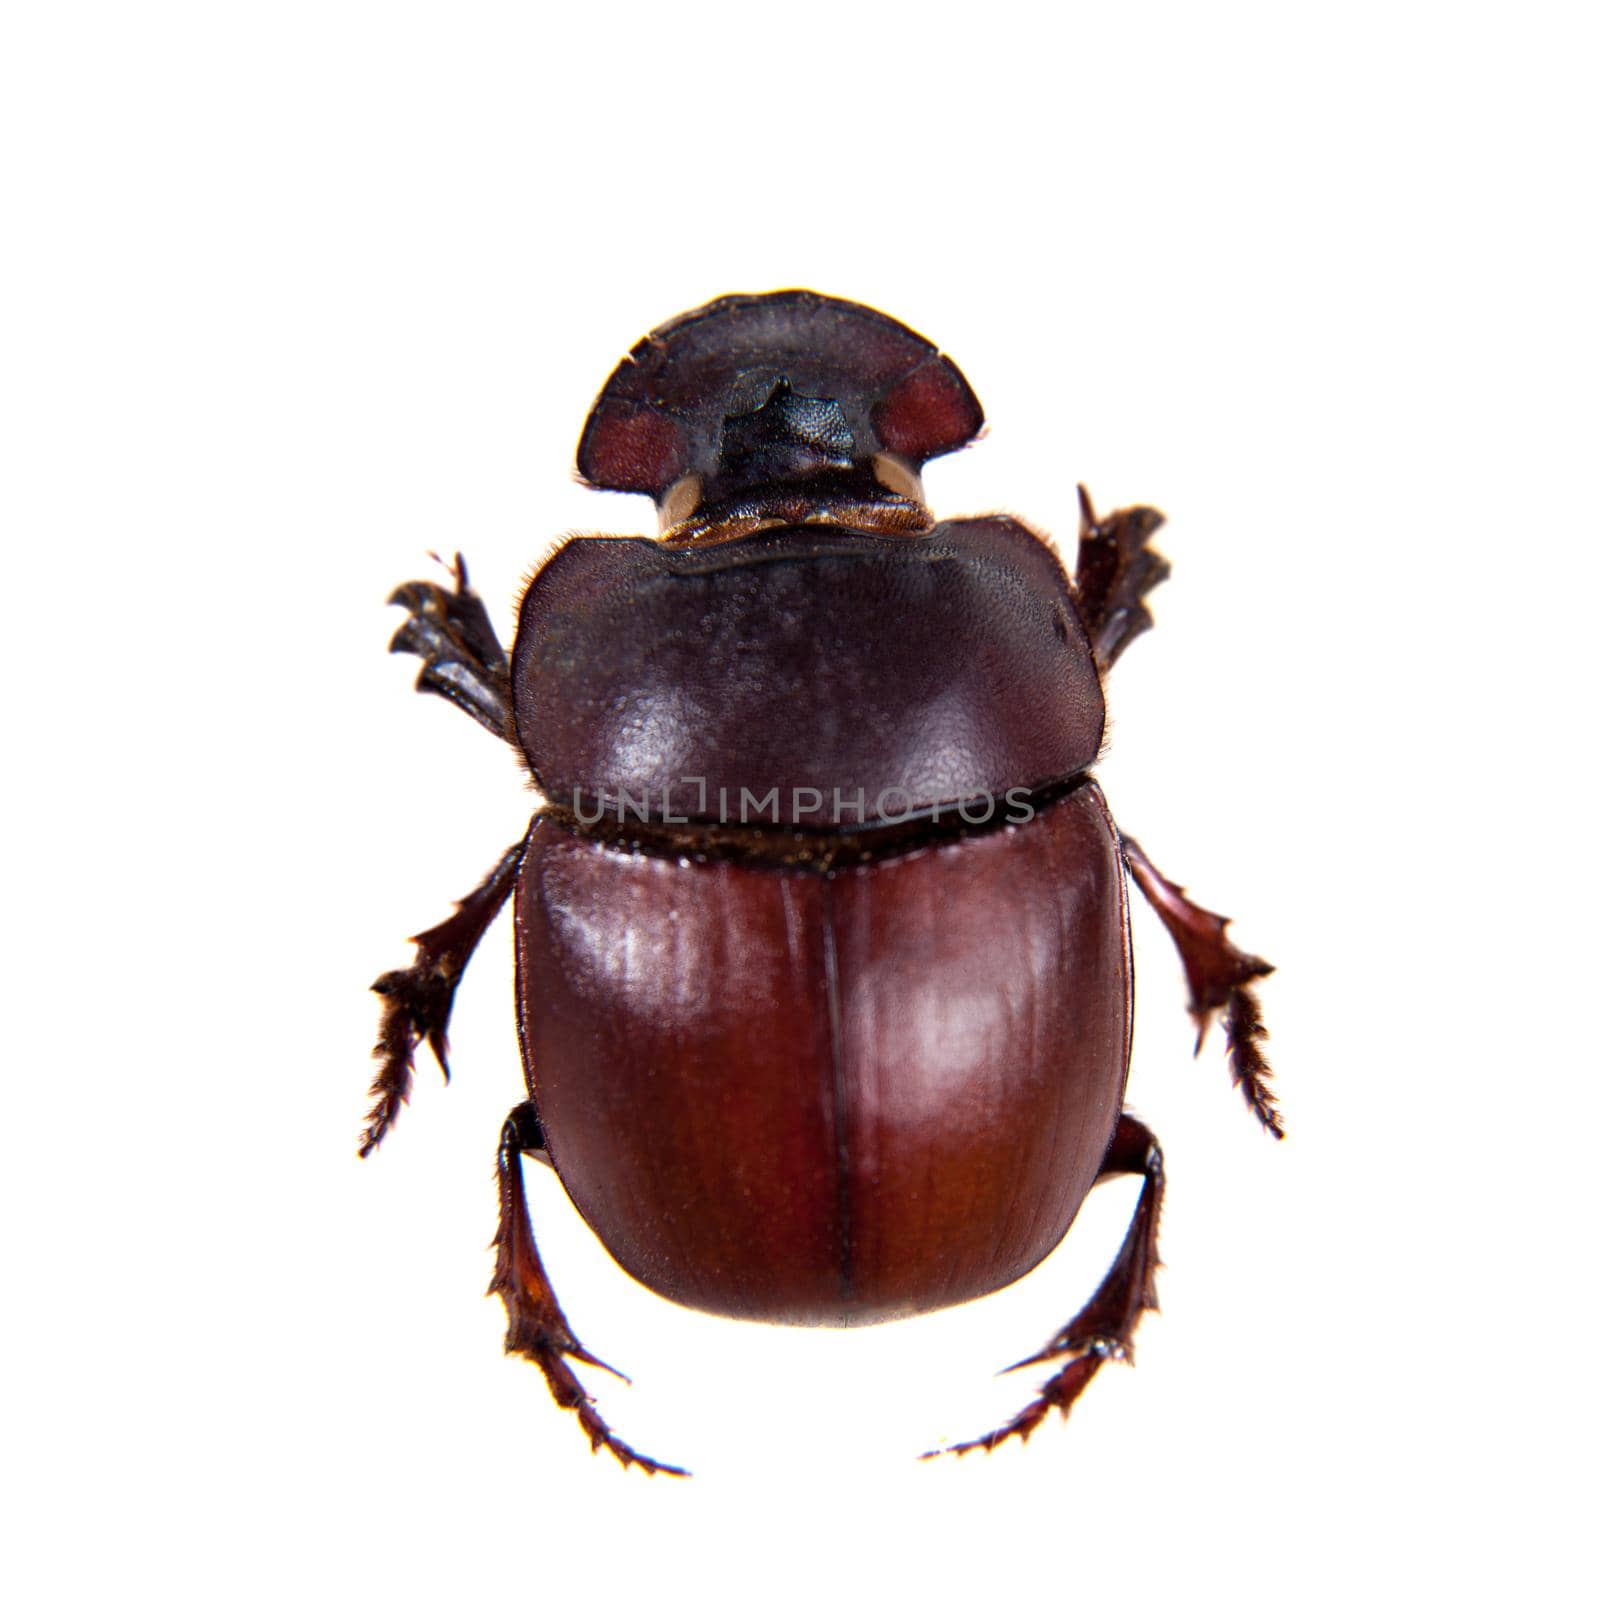 Canthon beetle in museum isolated on the white background